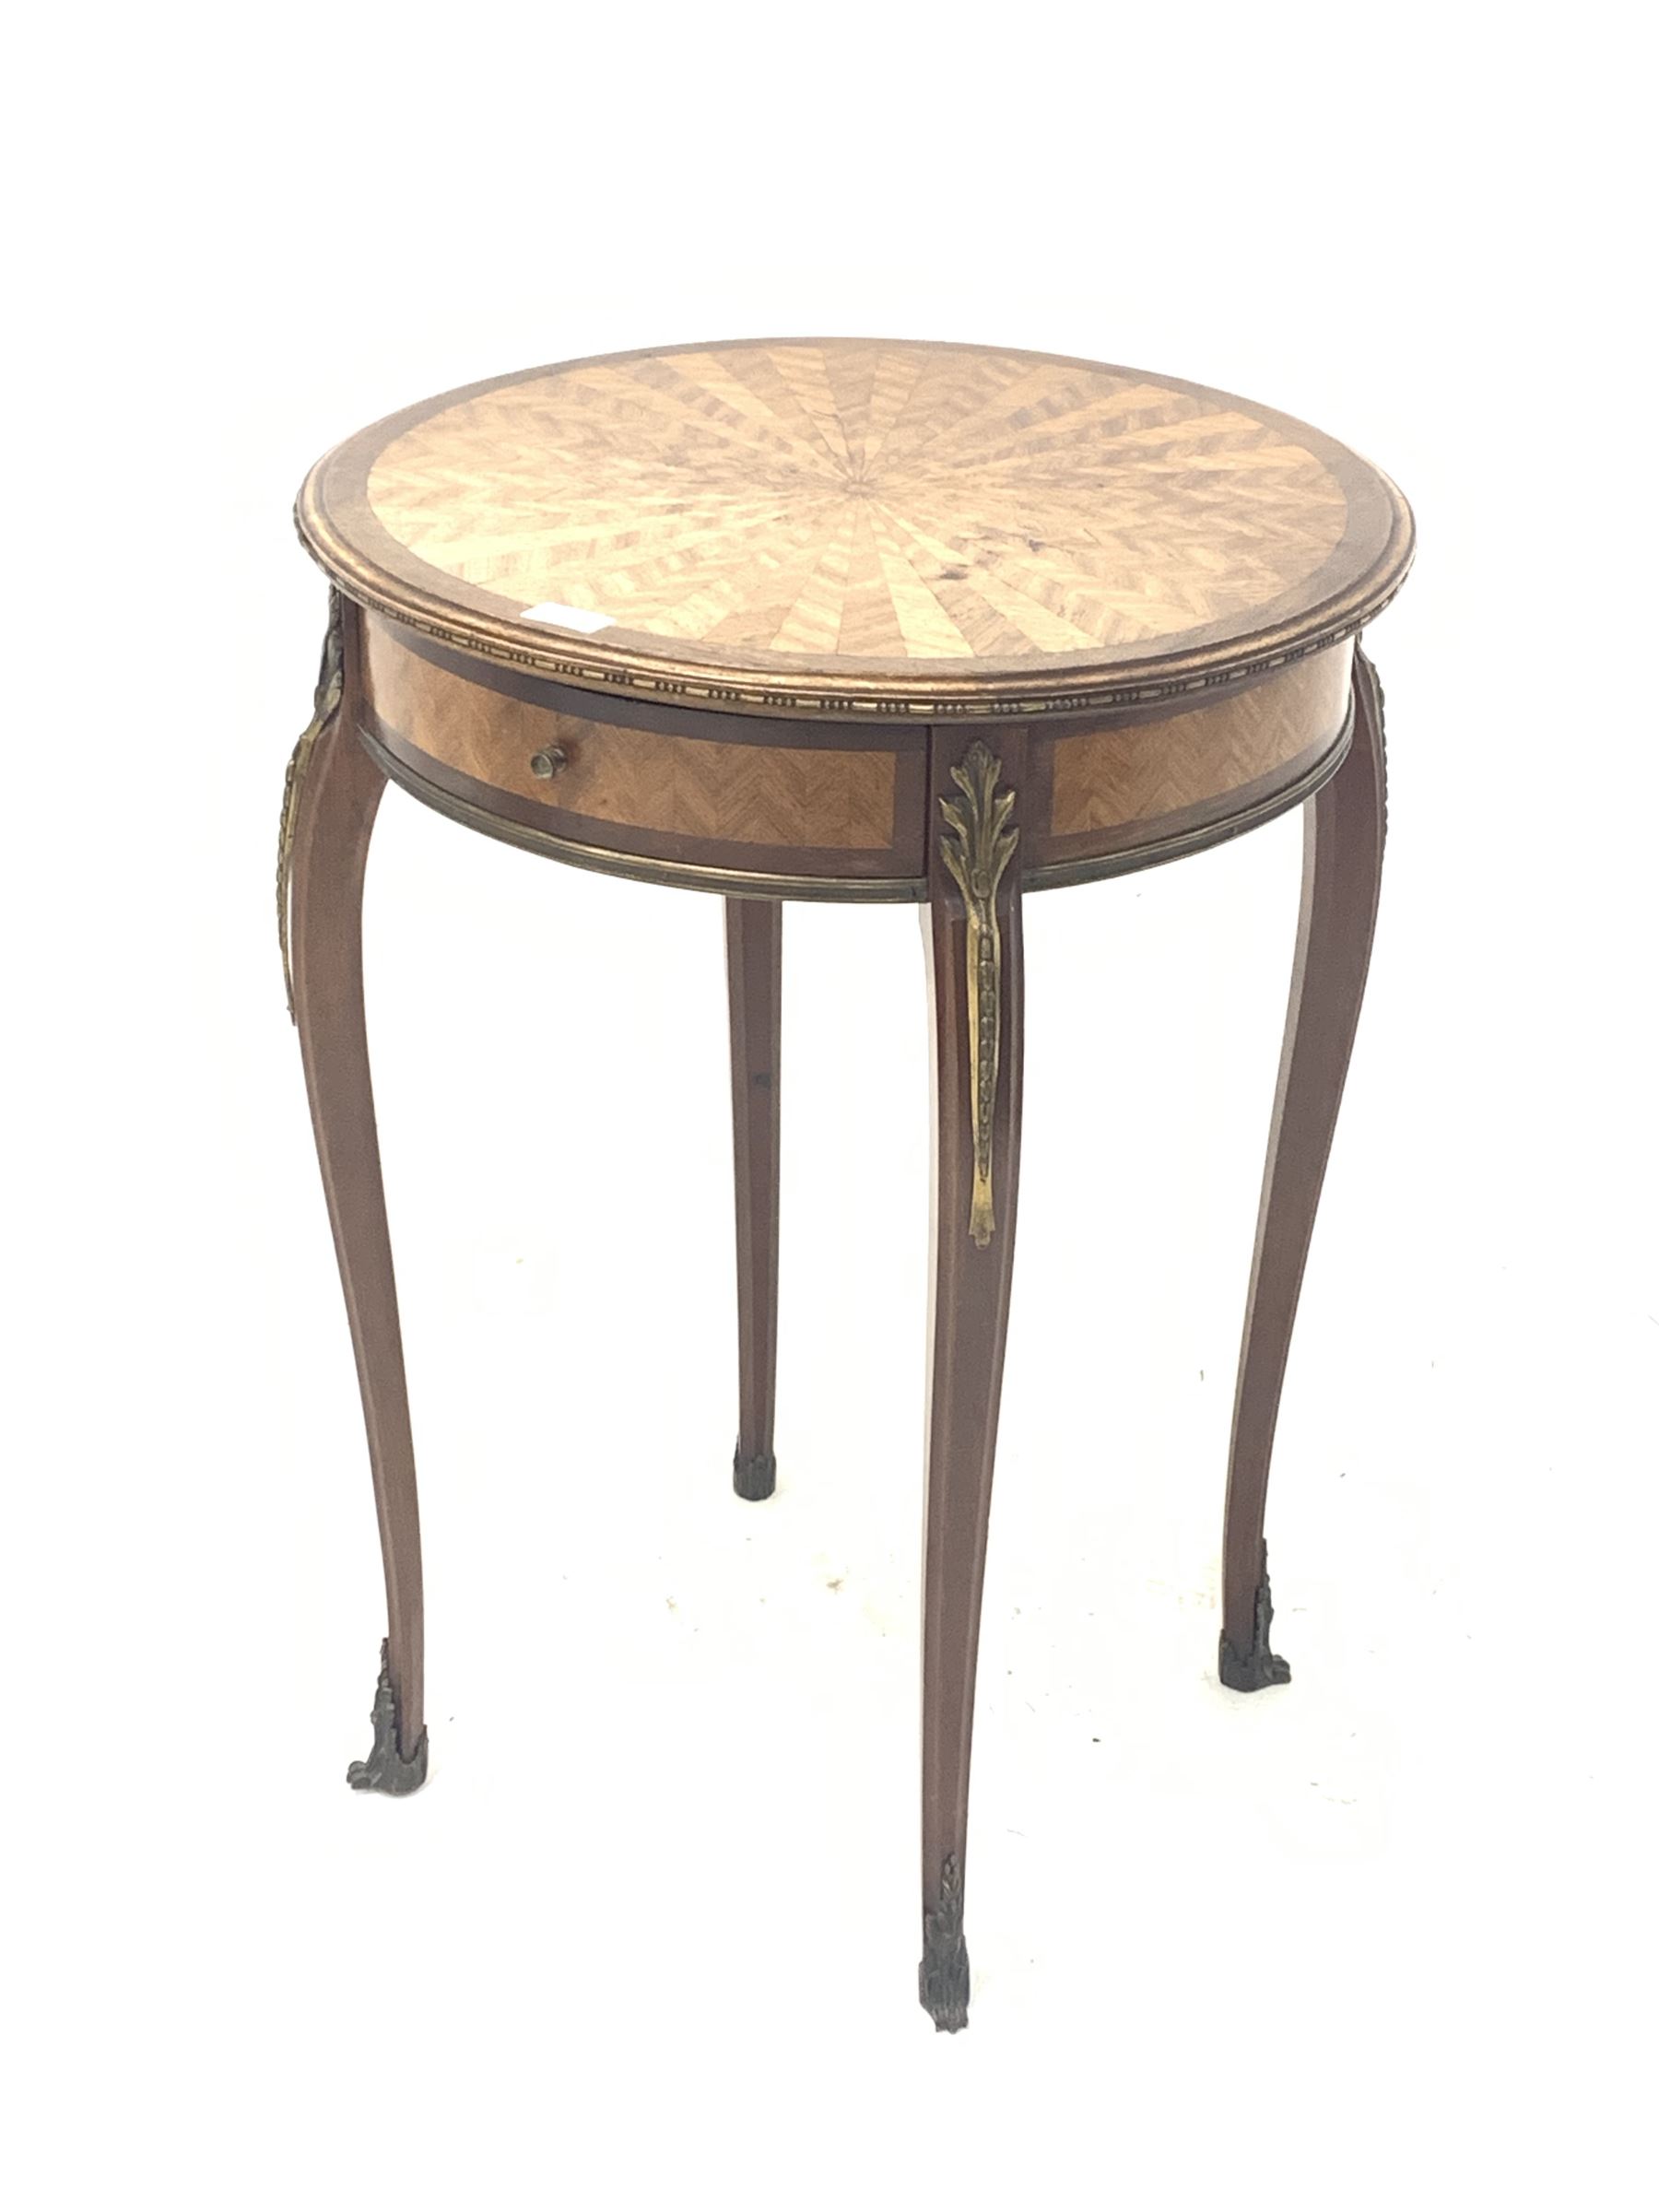 Early 20th century French kingwood and walnut occasional table